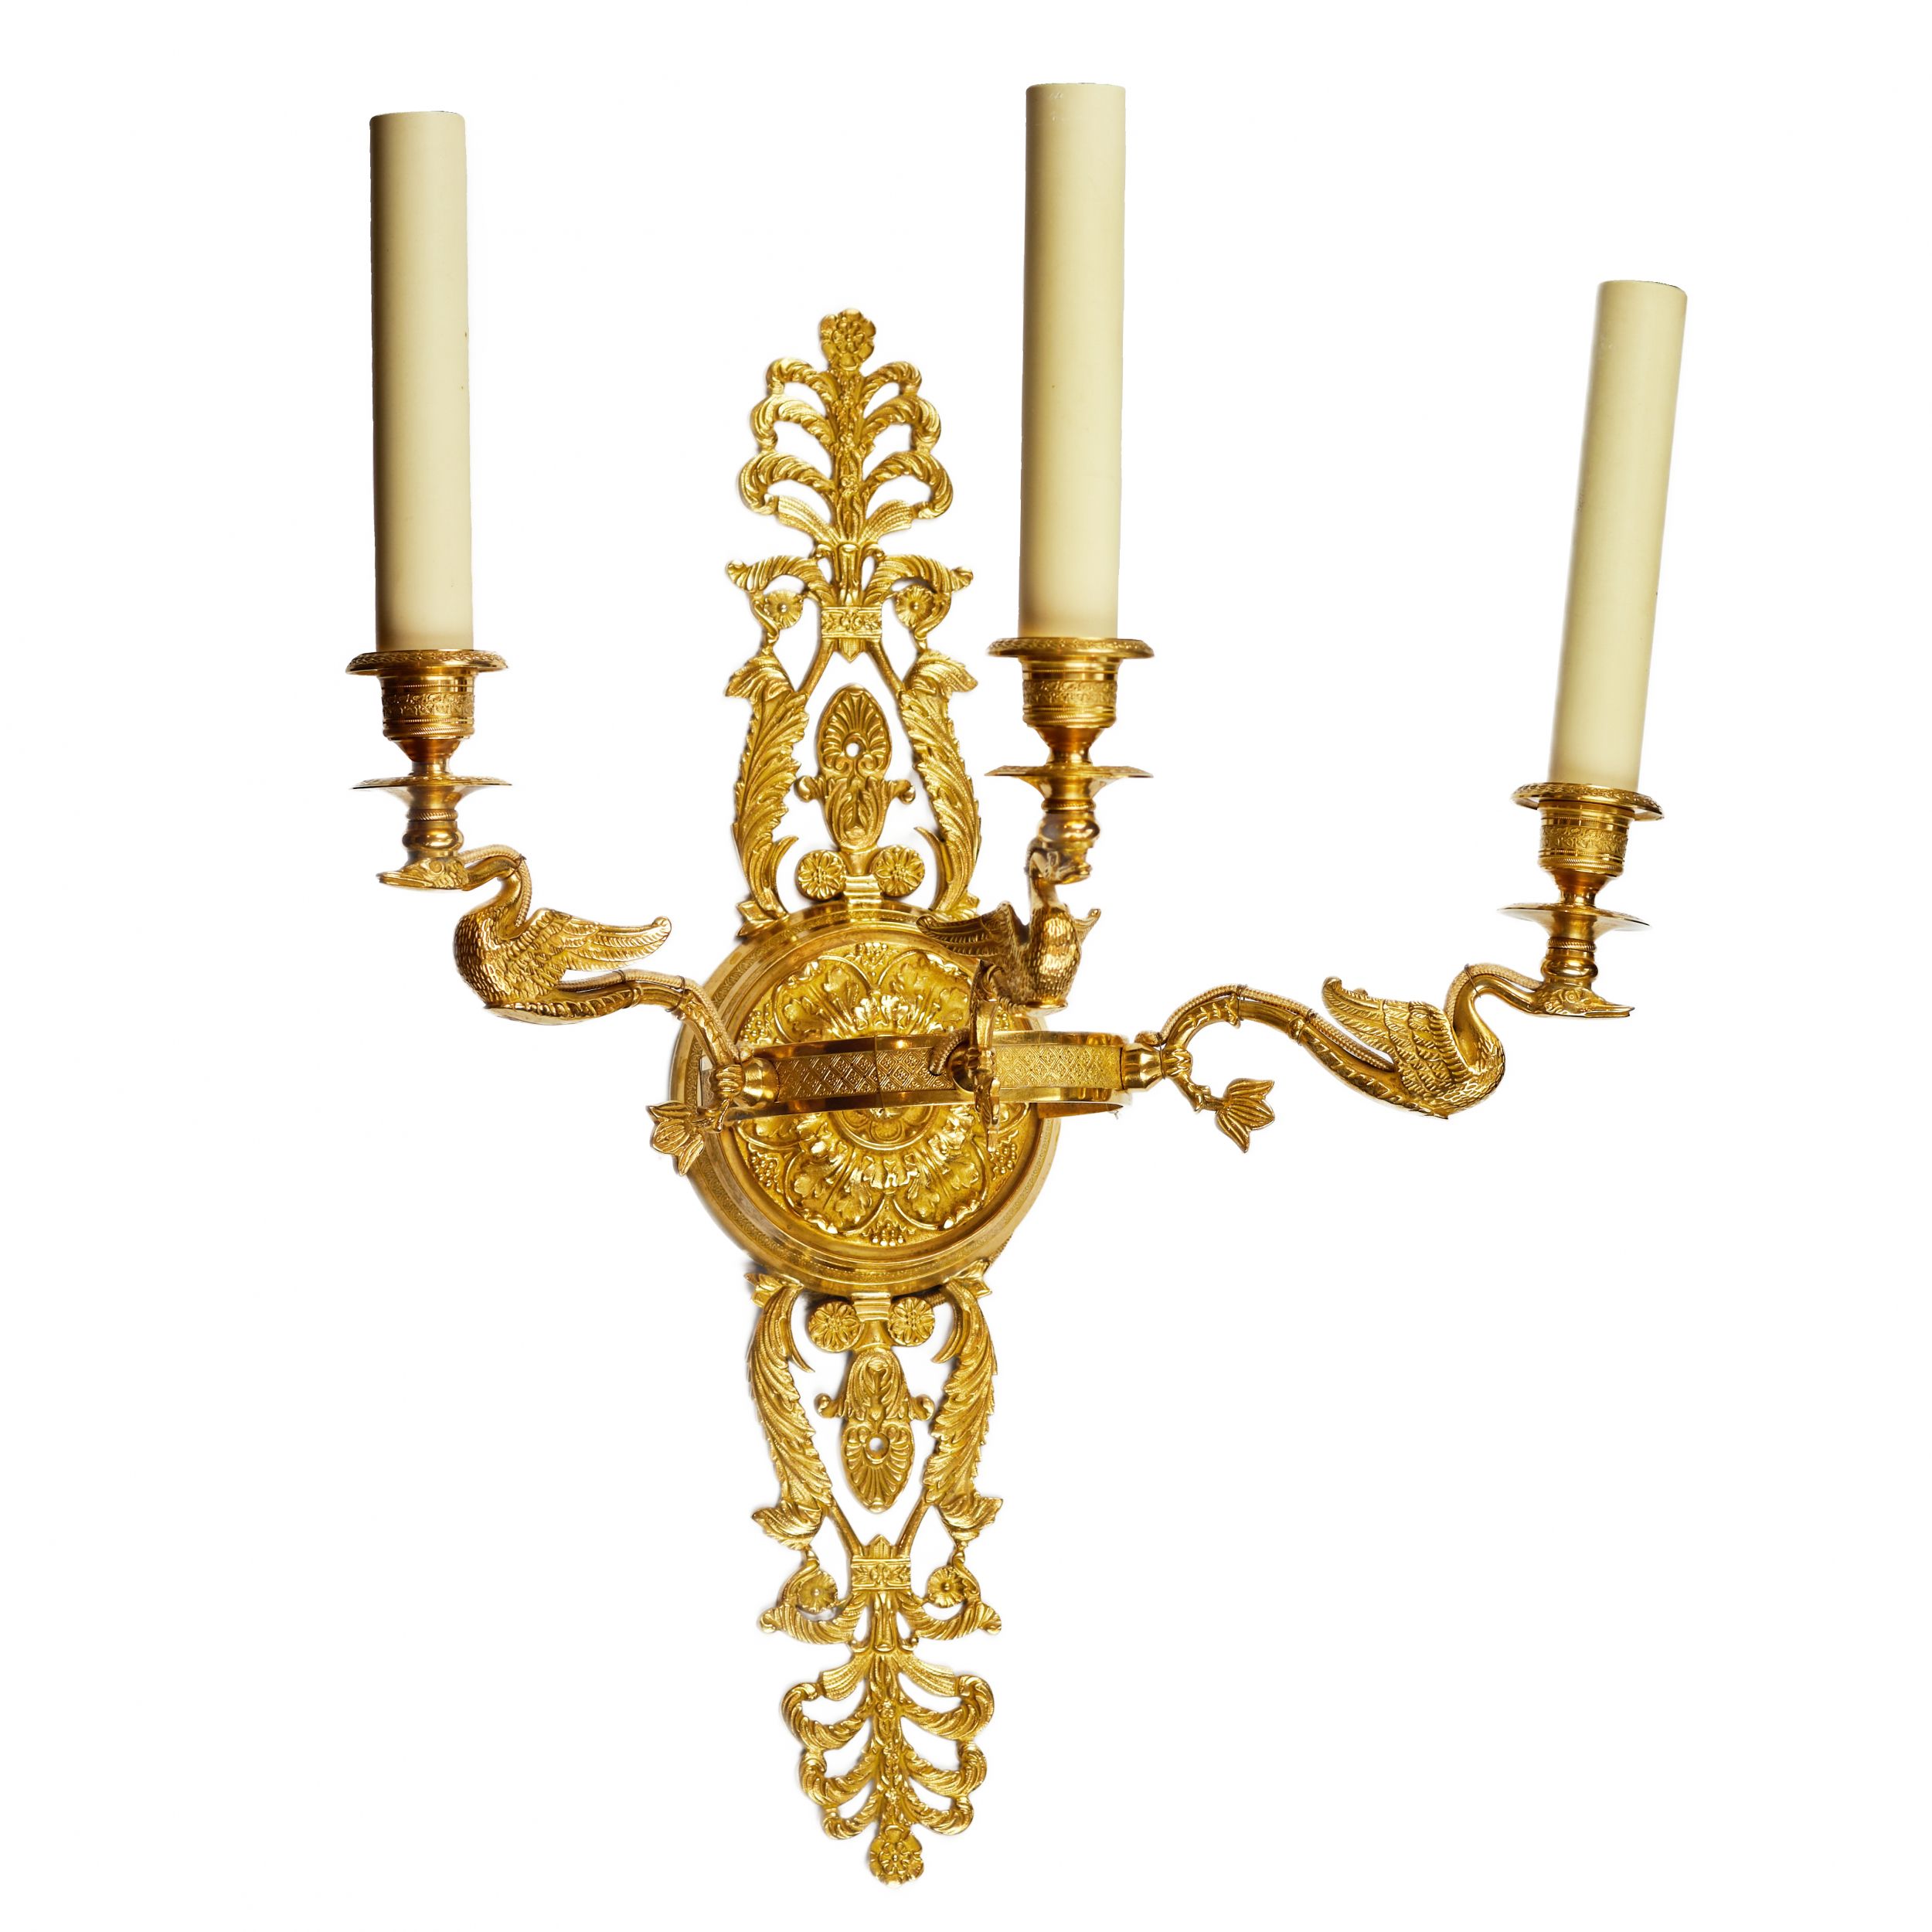 Six gilded bronze wall sconces with a Swan motif. France 20th century - Image 2 of 6